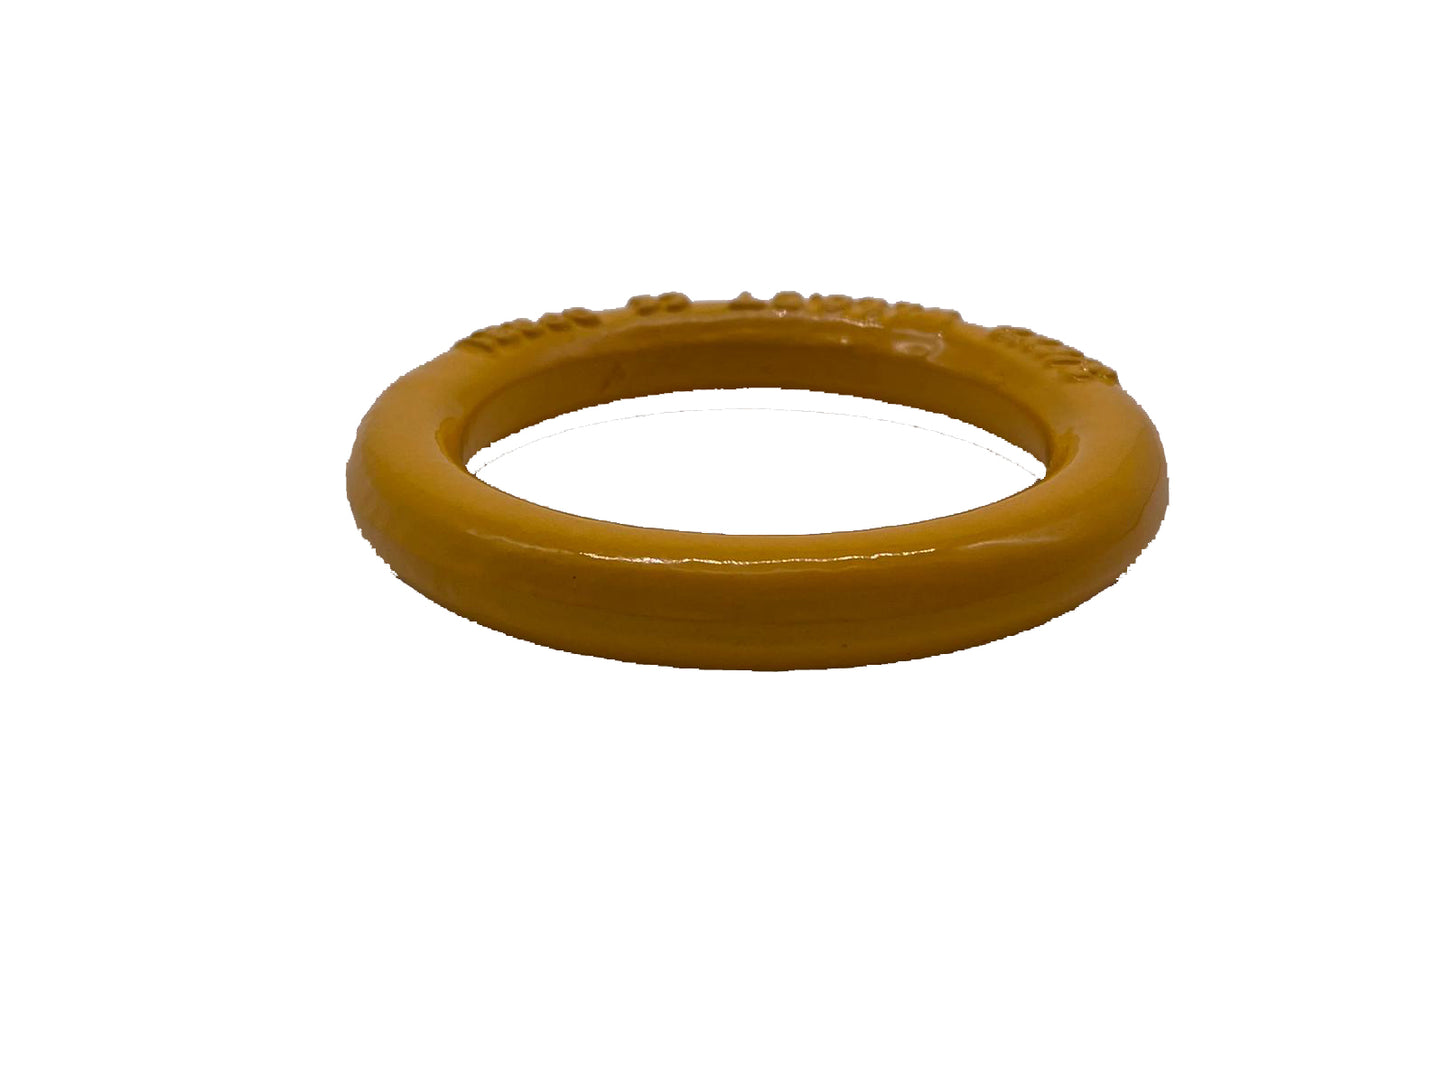 Grade 80 Drop Forged Round Ring (285-13) available from RiggingUK on a next day deliver